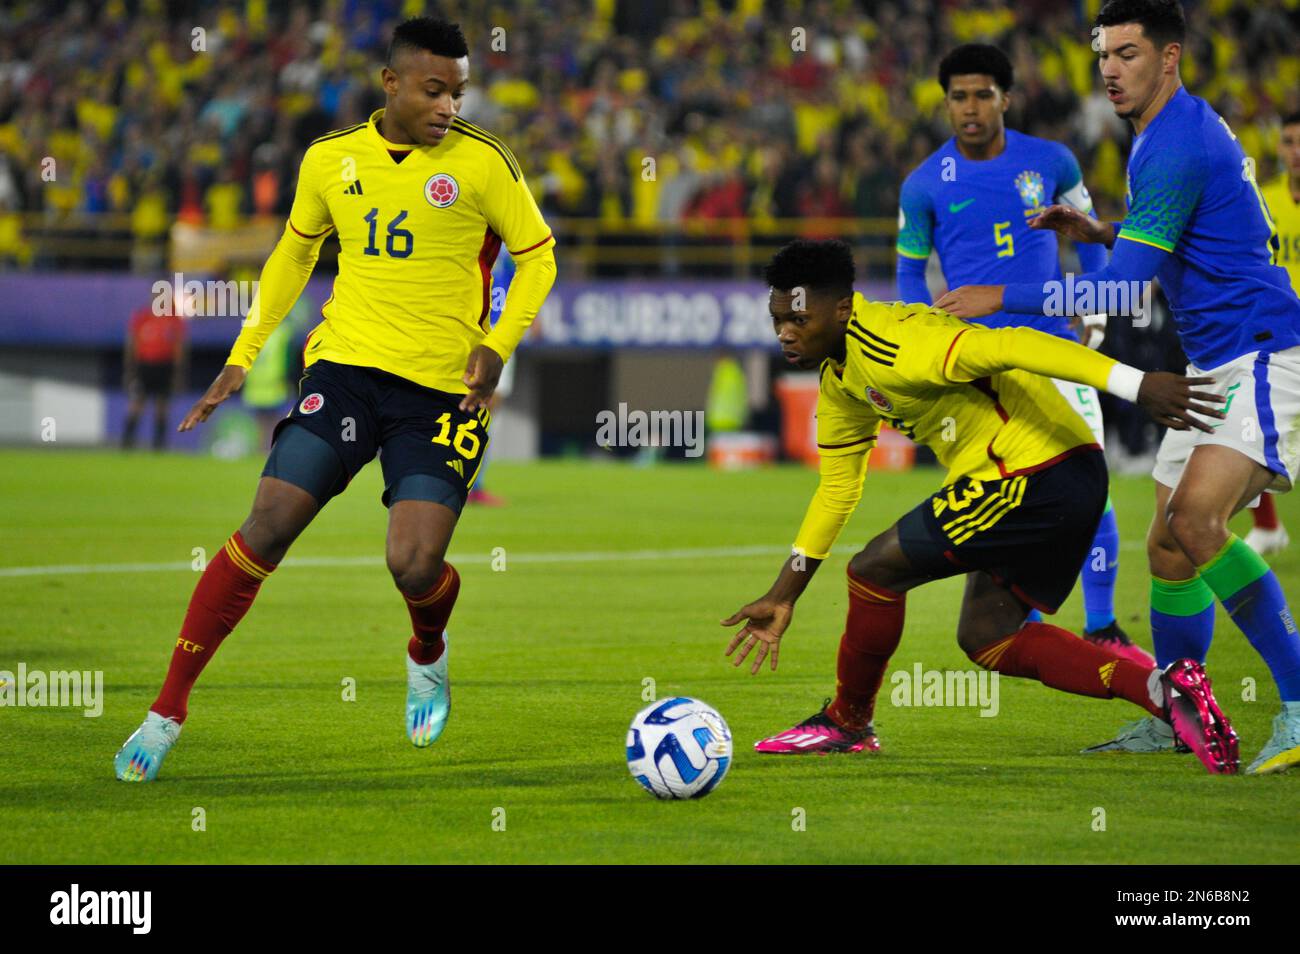 Bogota, Colombia on February 8, 2023. Colombia's Oscar Cortes and Jorge Cabezas during the CONMEBOL South American U-20 Colombia tournament match between Colombia and Brazil, in Bogota, Colombia on February 8, 2023. Photo by: Chepa Beltran/Long Visual Press Stock Photo